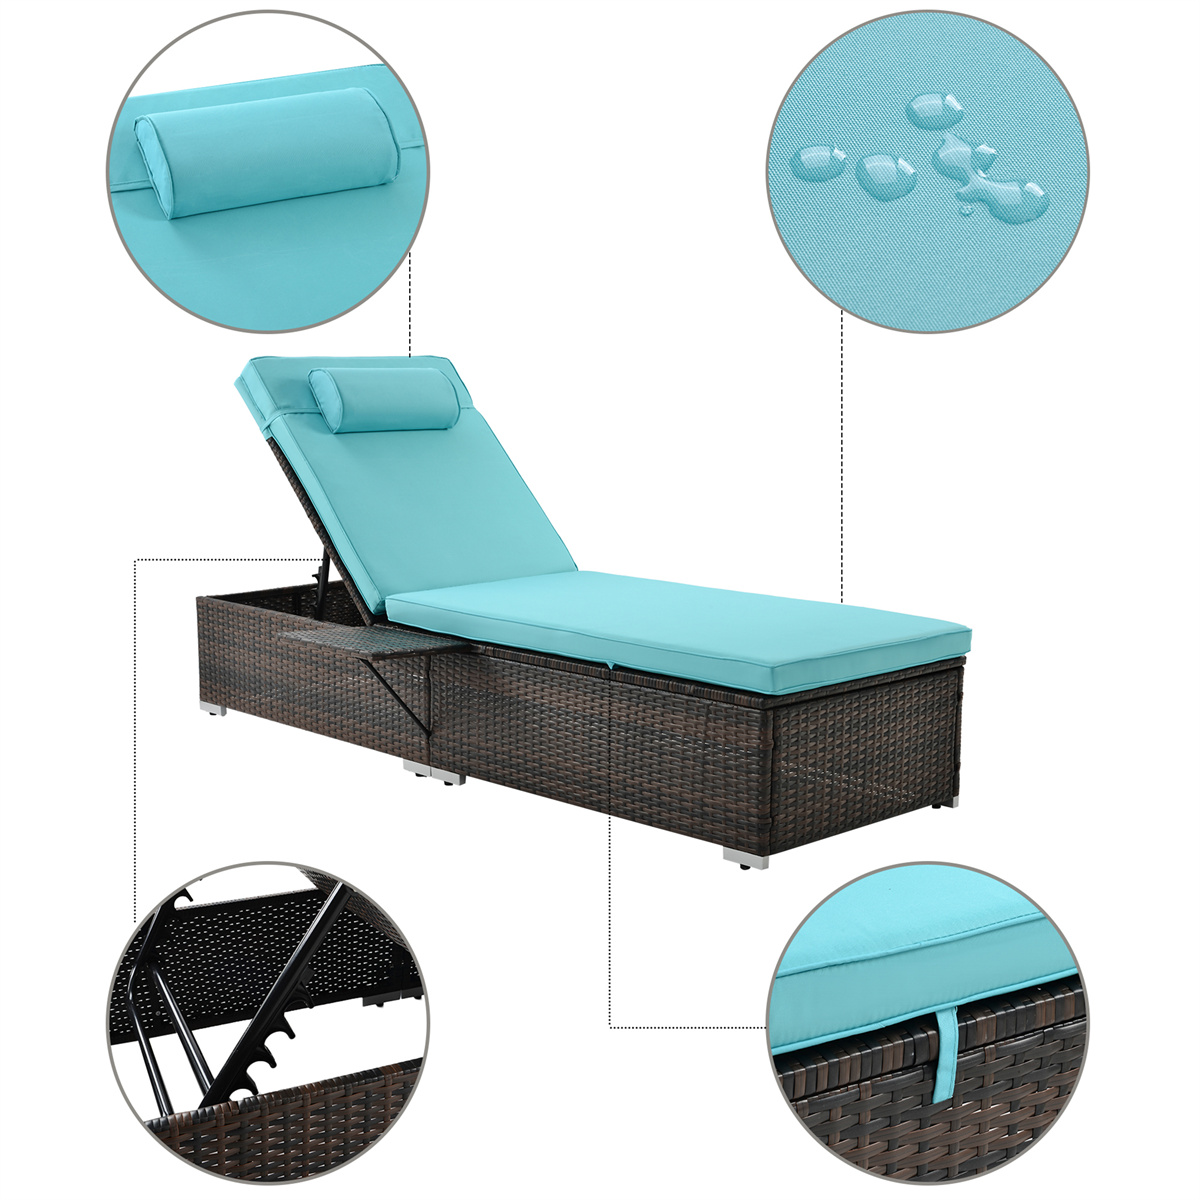 Outdoor Wicker Rattan Chaise Lounge,2 Pieces Patio Brown Rattan Reclining Chair Set,Adjustable Backrest Recliners with Side Table and Comfort Head Pillow for Garden Patio Balcony Beach Coffee Bar - image 2 of 7